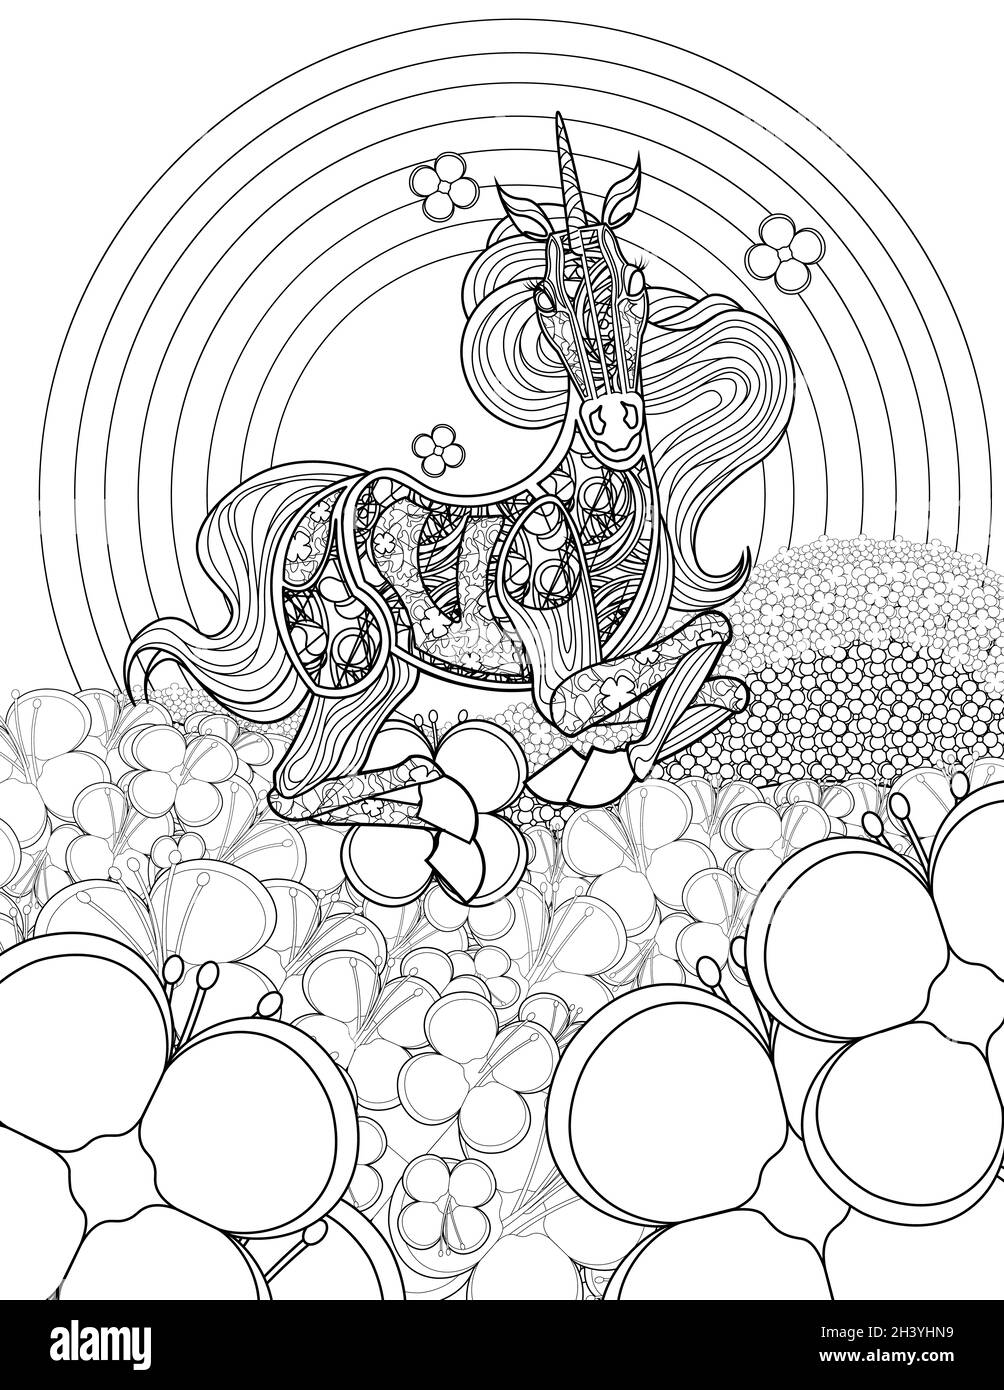 Beautiful Unicorn In Flower Fields Looking Front Colorless Line Drawing. Mythical Horned Horse Bending Down On Field Coloring Bo Stock Photo